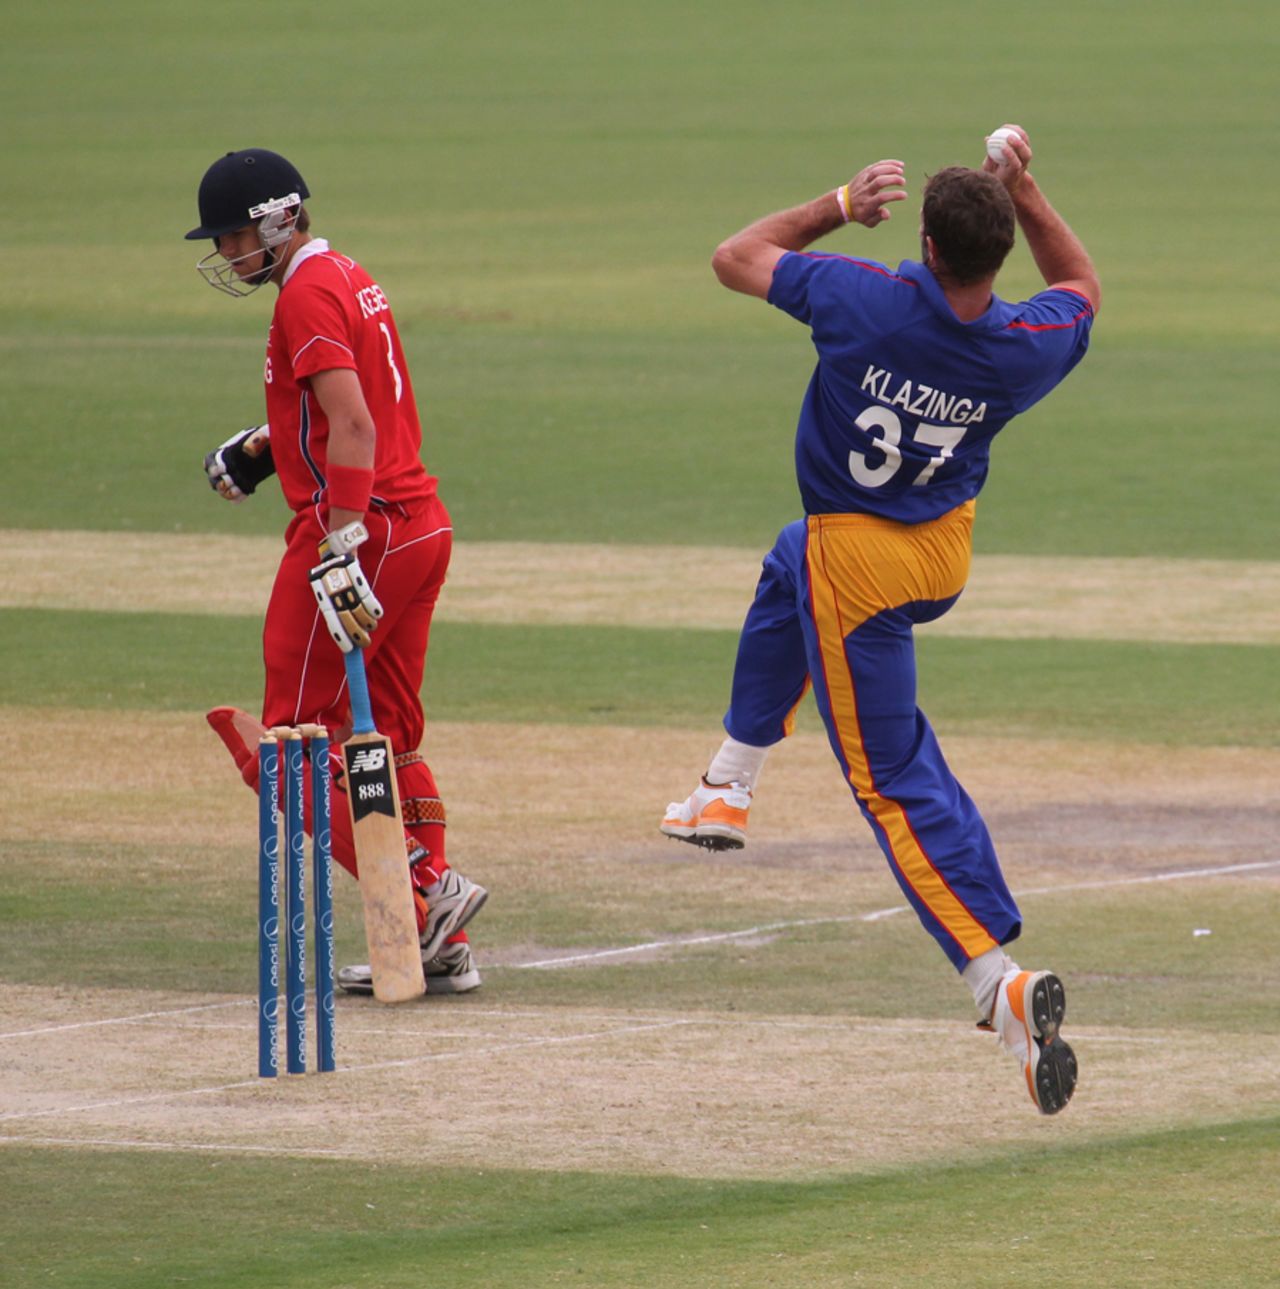 Louis Klazinga claimed 5-50 against Hong Kong at the ICC WCL2 in Dubai on 14th April 2011